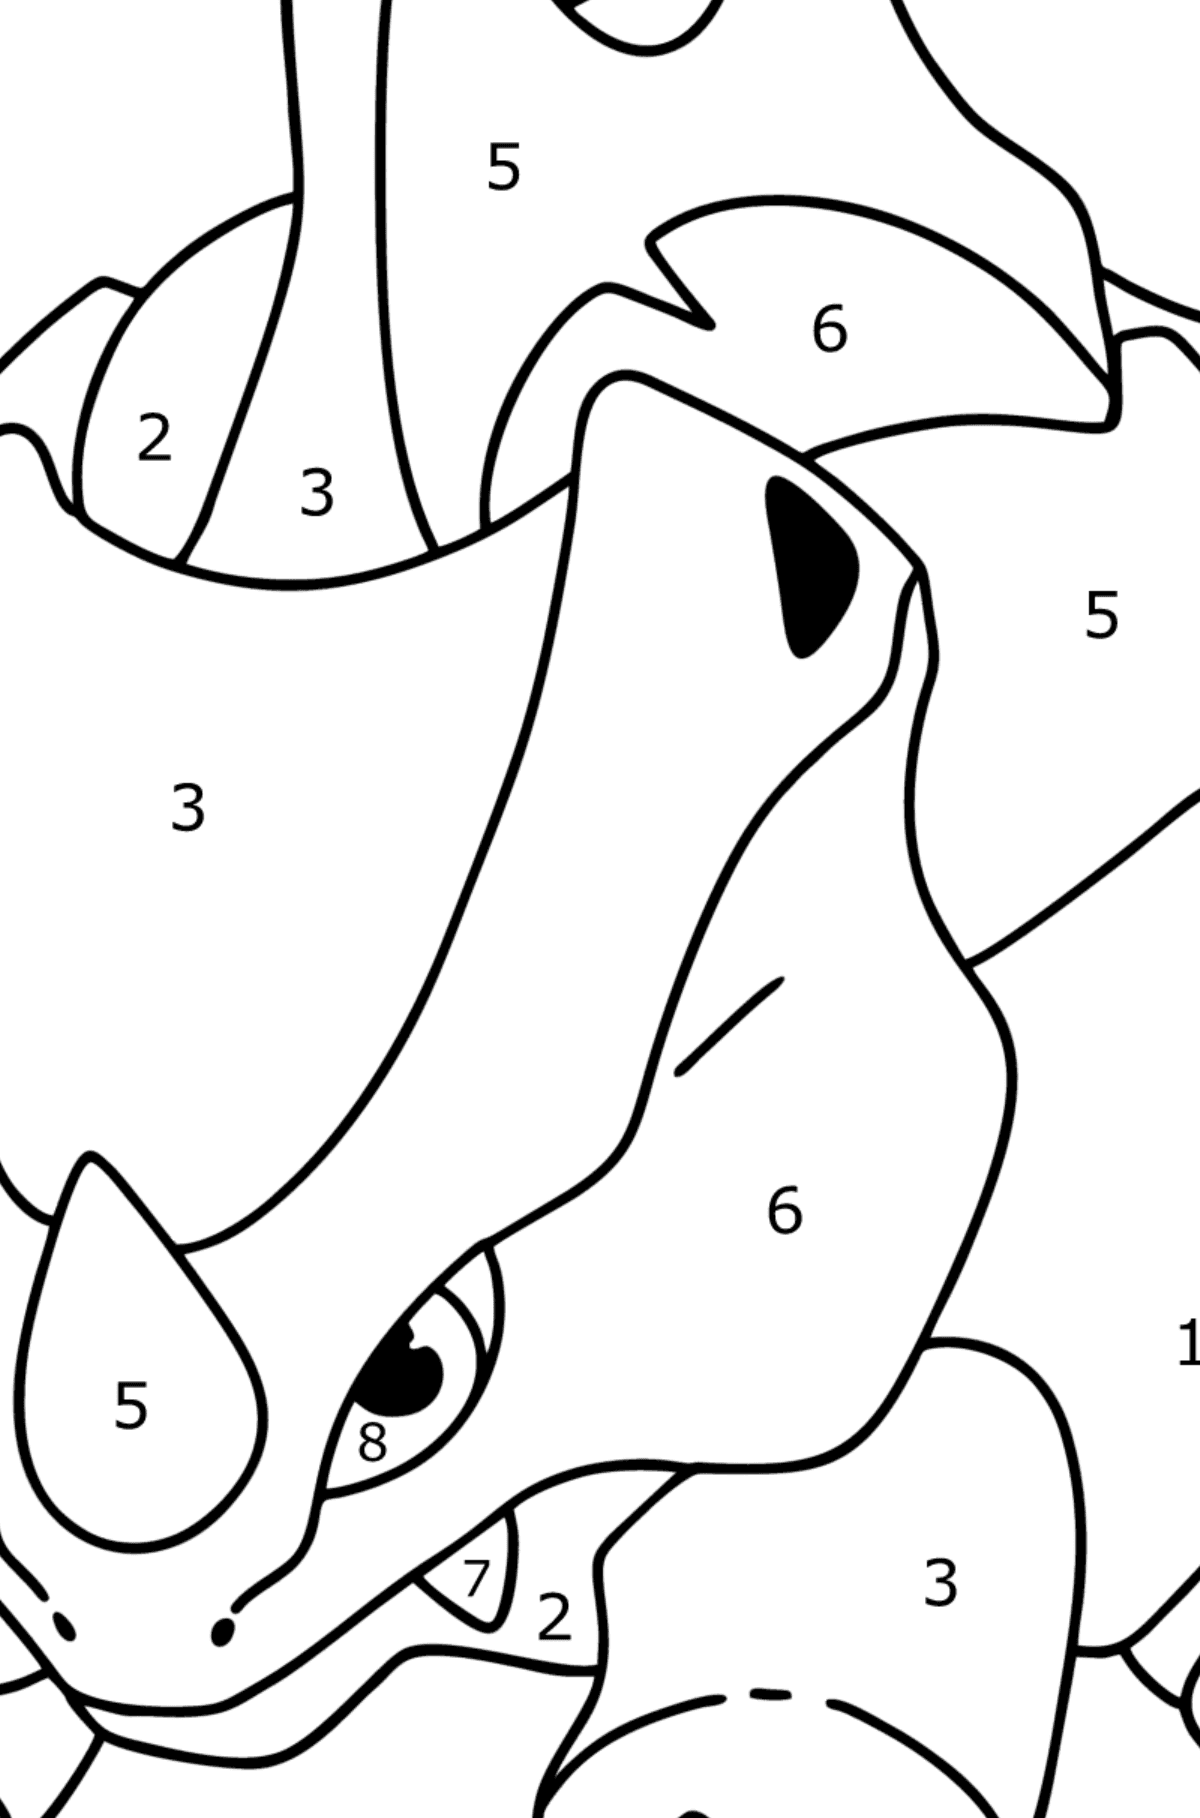 Coloring page Pokemon Go Rhyhorn - Coloring by Numbers for Kids